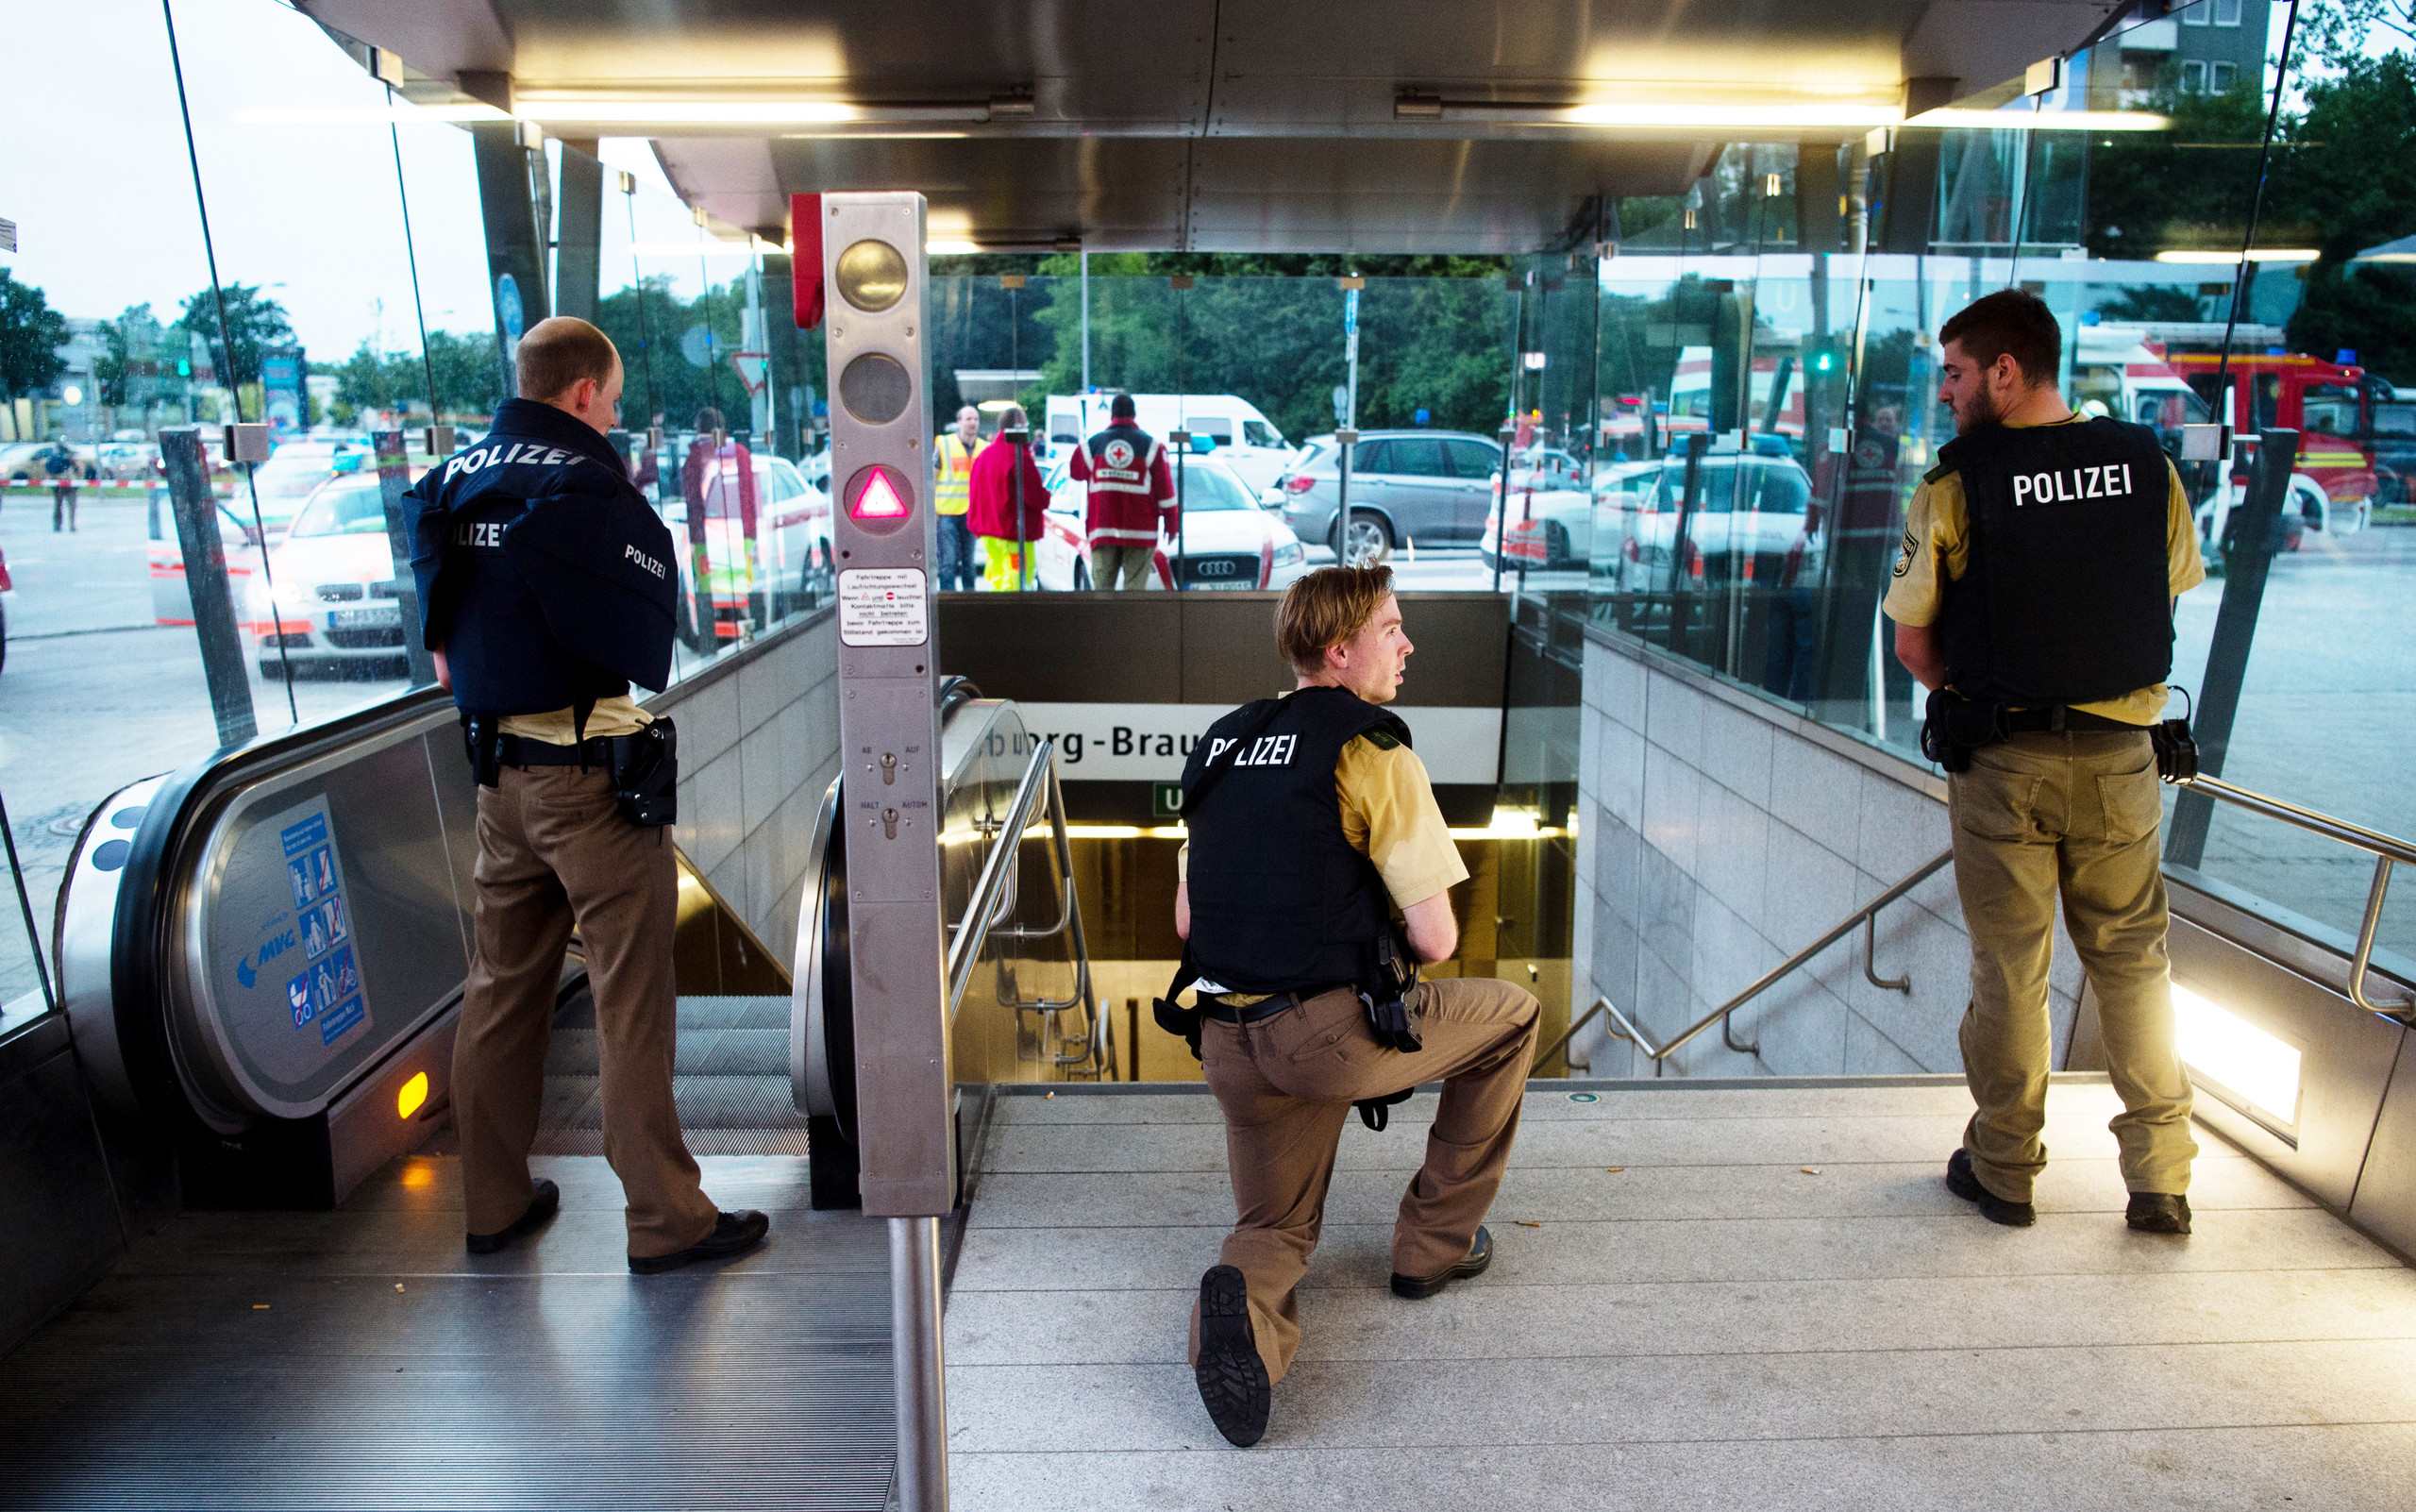 Police secures the entrance to a subway station near a shopping mall where a shooting took place on July 22, 2016 in Munich. Several people were killed on Friday in a shooting rampage by a lone gunman in a Munich shopping centre, media reports said / AFP PHOTO / dpa / Lukas Schulze / Germany OUT